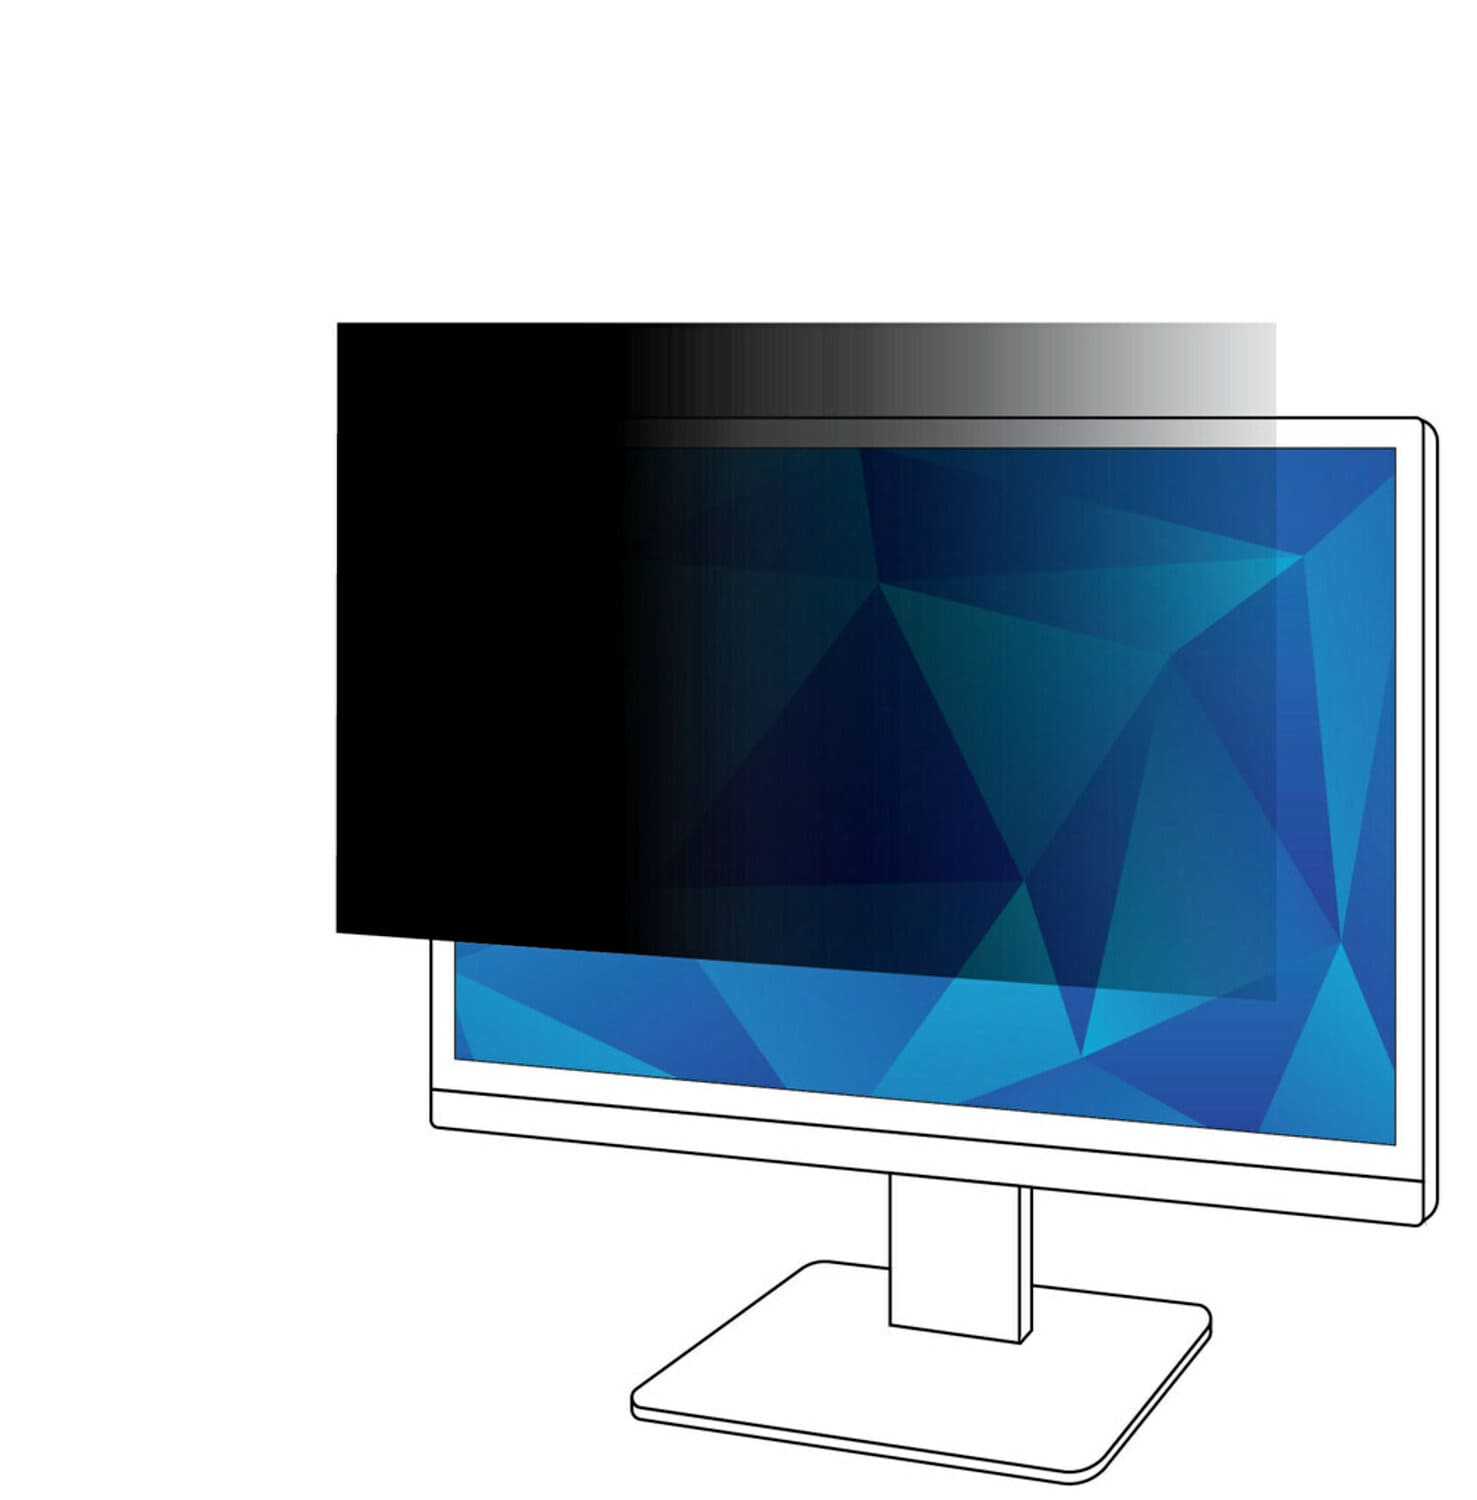 7100036575 - 3M Privacy Filter for 19.5in Monitor, 16:9, PF195W9B